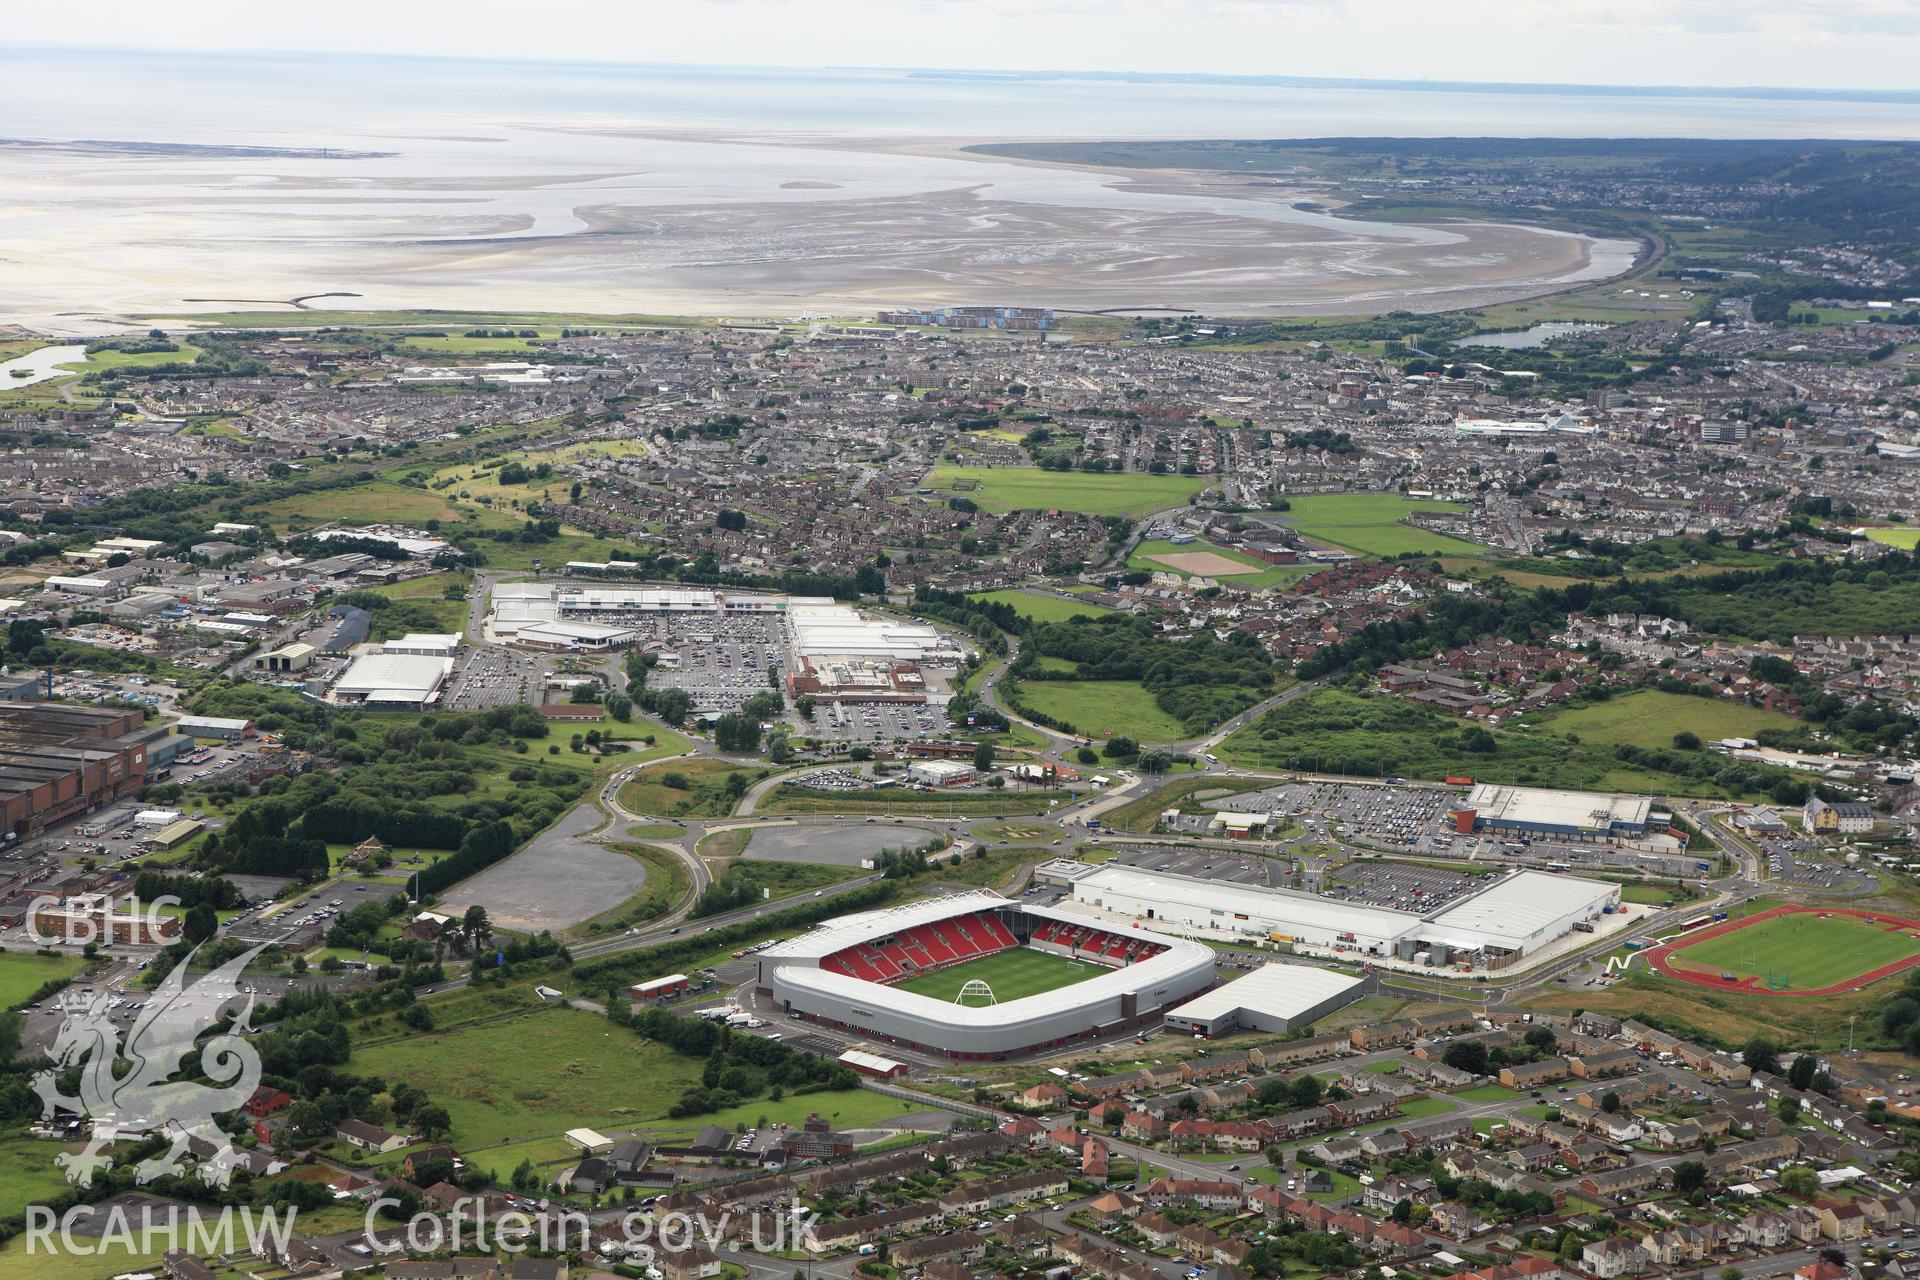 RCAHMW colour oblique aerial photograph of Parc-y-Scarlets Stadium, Llanelli. Taken on 09 July 2009 by Toby Driver